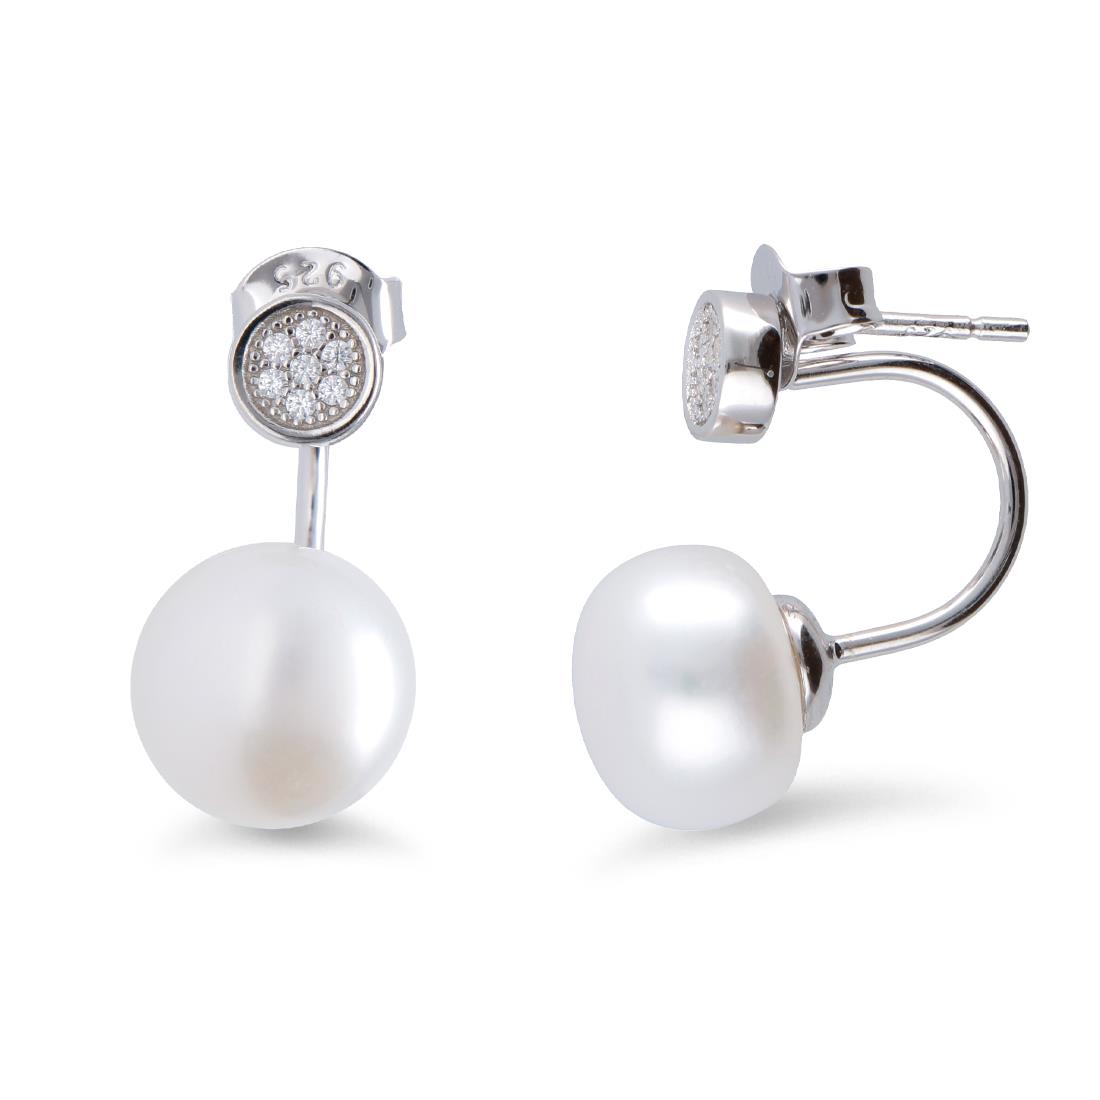 Silver earrings with button pearl and zircons - MAYUMI